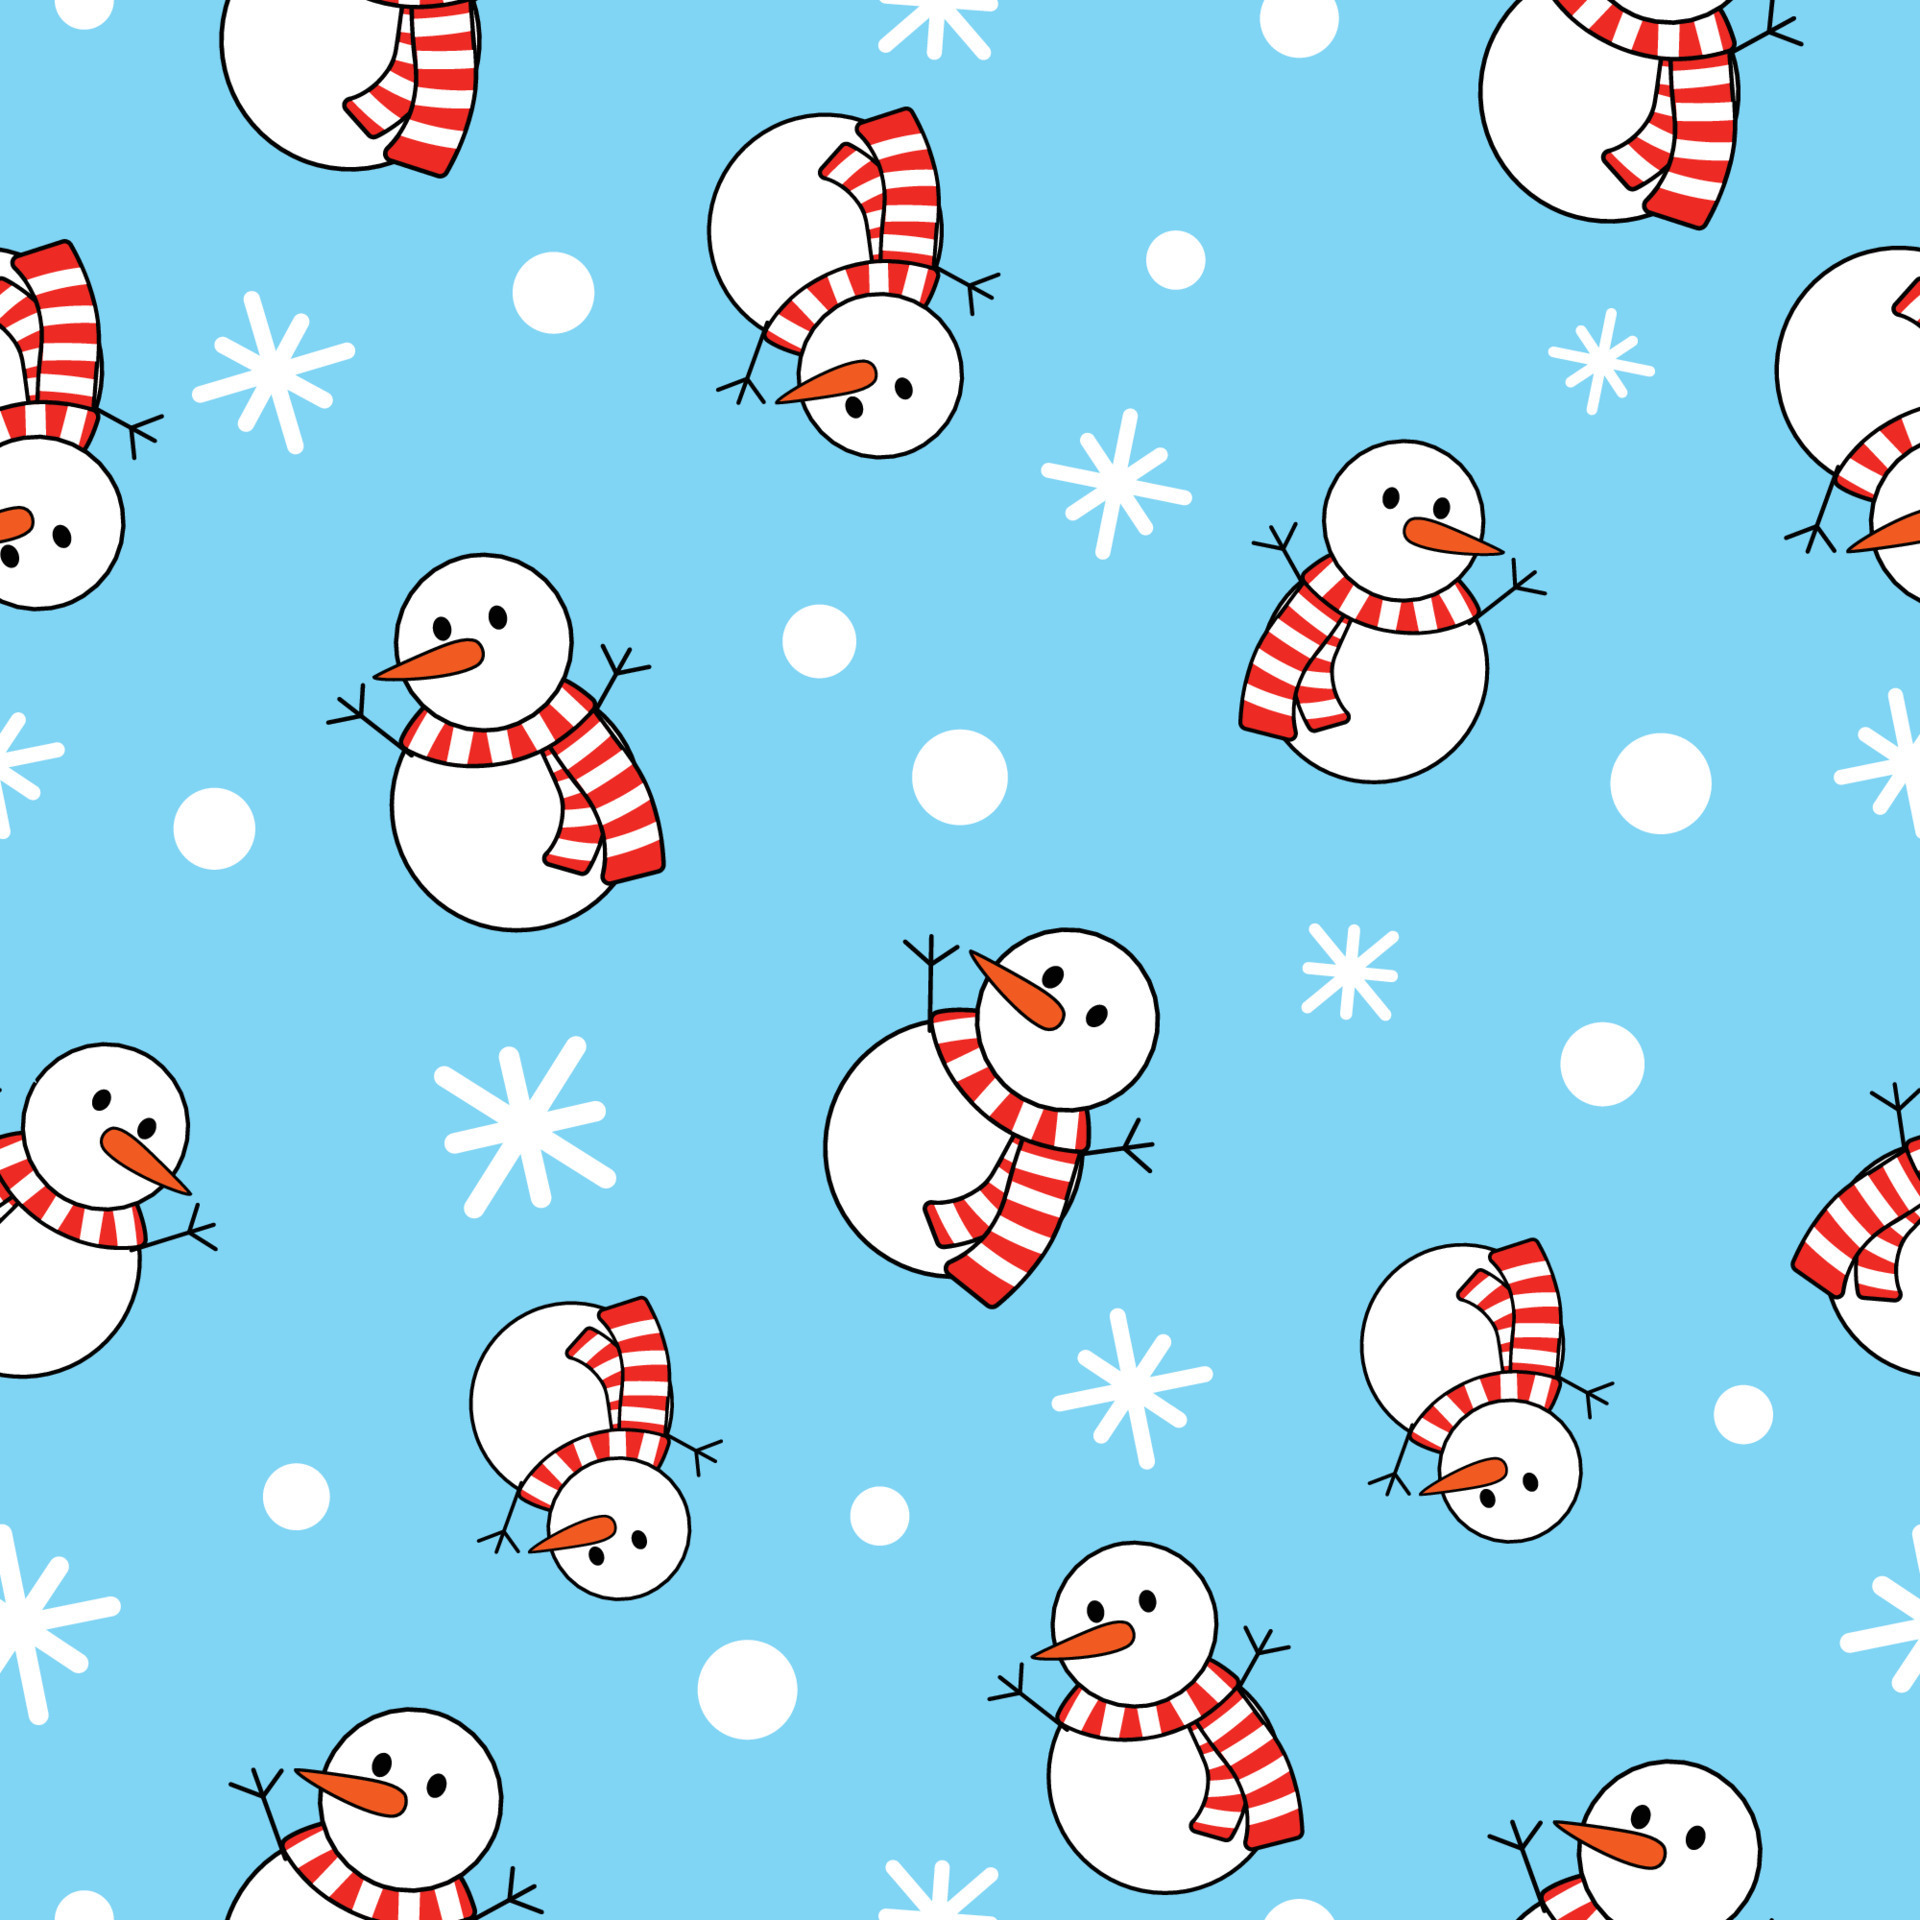 https://static.vecteezy.com/system/resources/previews/013/478/306/original/snowman-cartoon-pattern-seamless-for-wrapping-paper-wallpaper-poster-illustration-vector.jpg